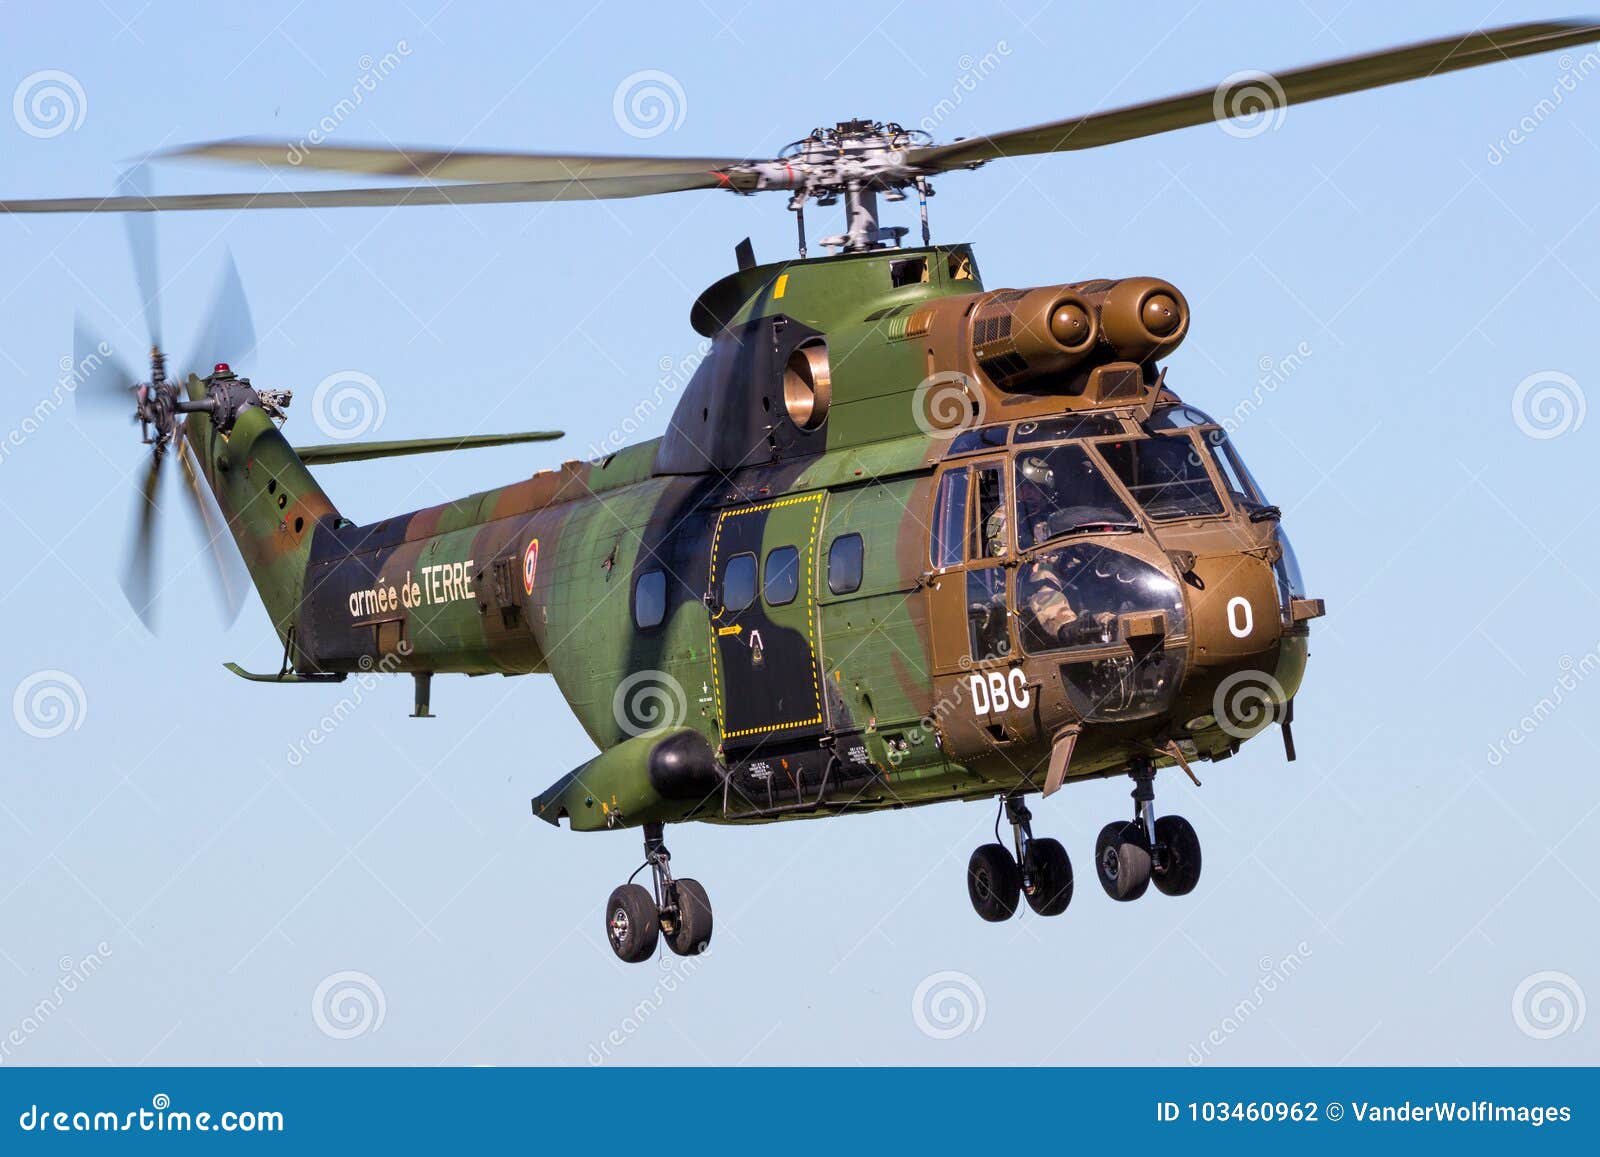 French Army Puma Helicopter in Flight Editorial Photography - Image aircraft, 3rhc: 103460962